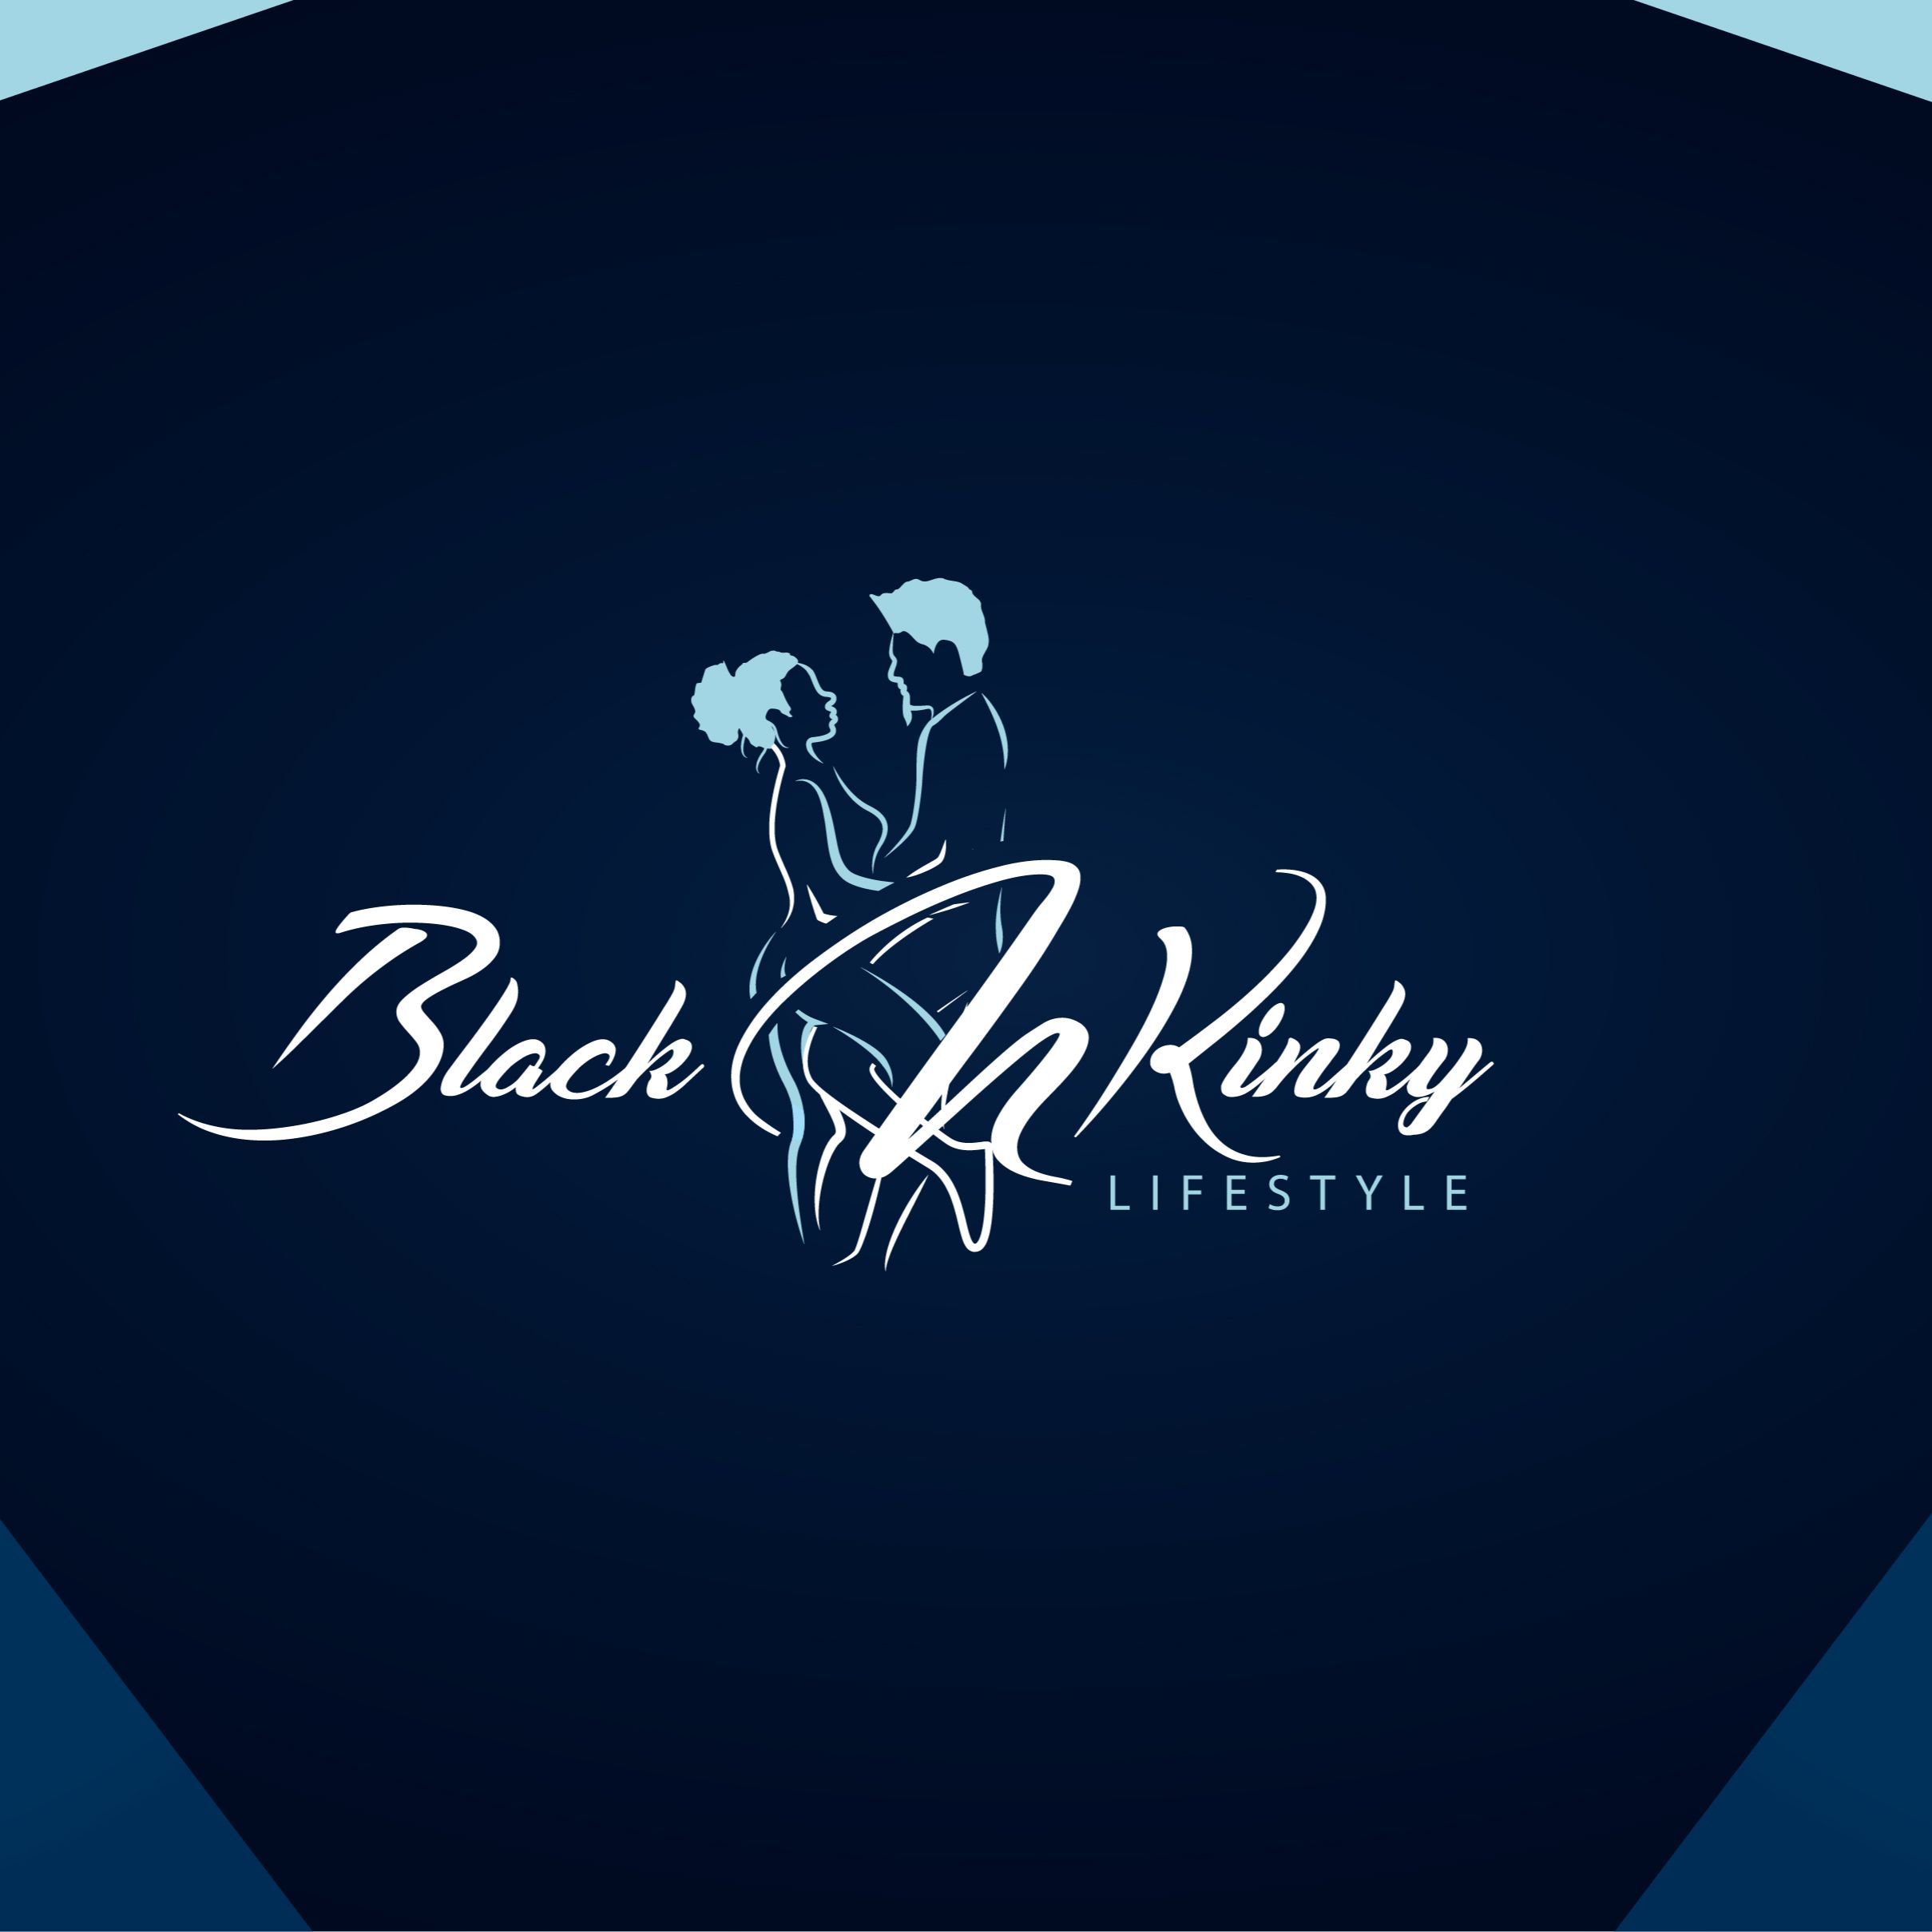 Stream The Black n Kinky Lifestyle A Swingers Podcast music Listen to songs, albums, playlists for free on SoundCloud pic